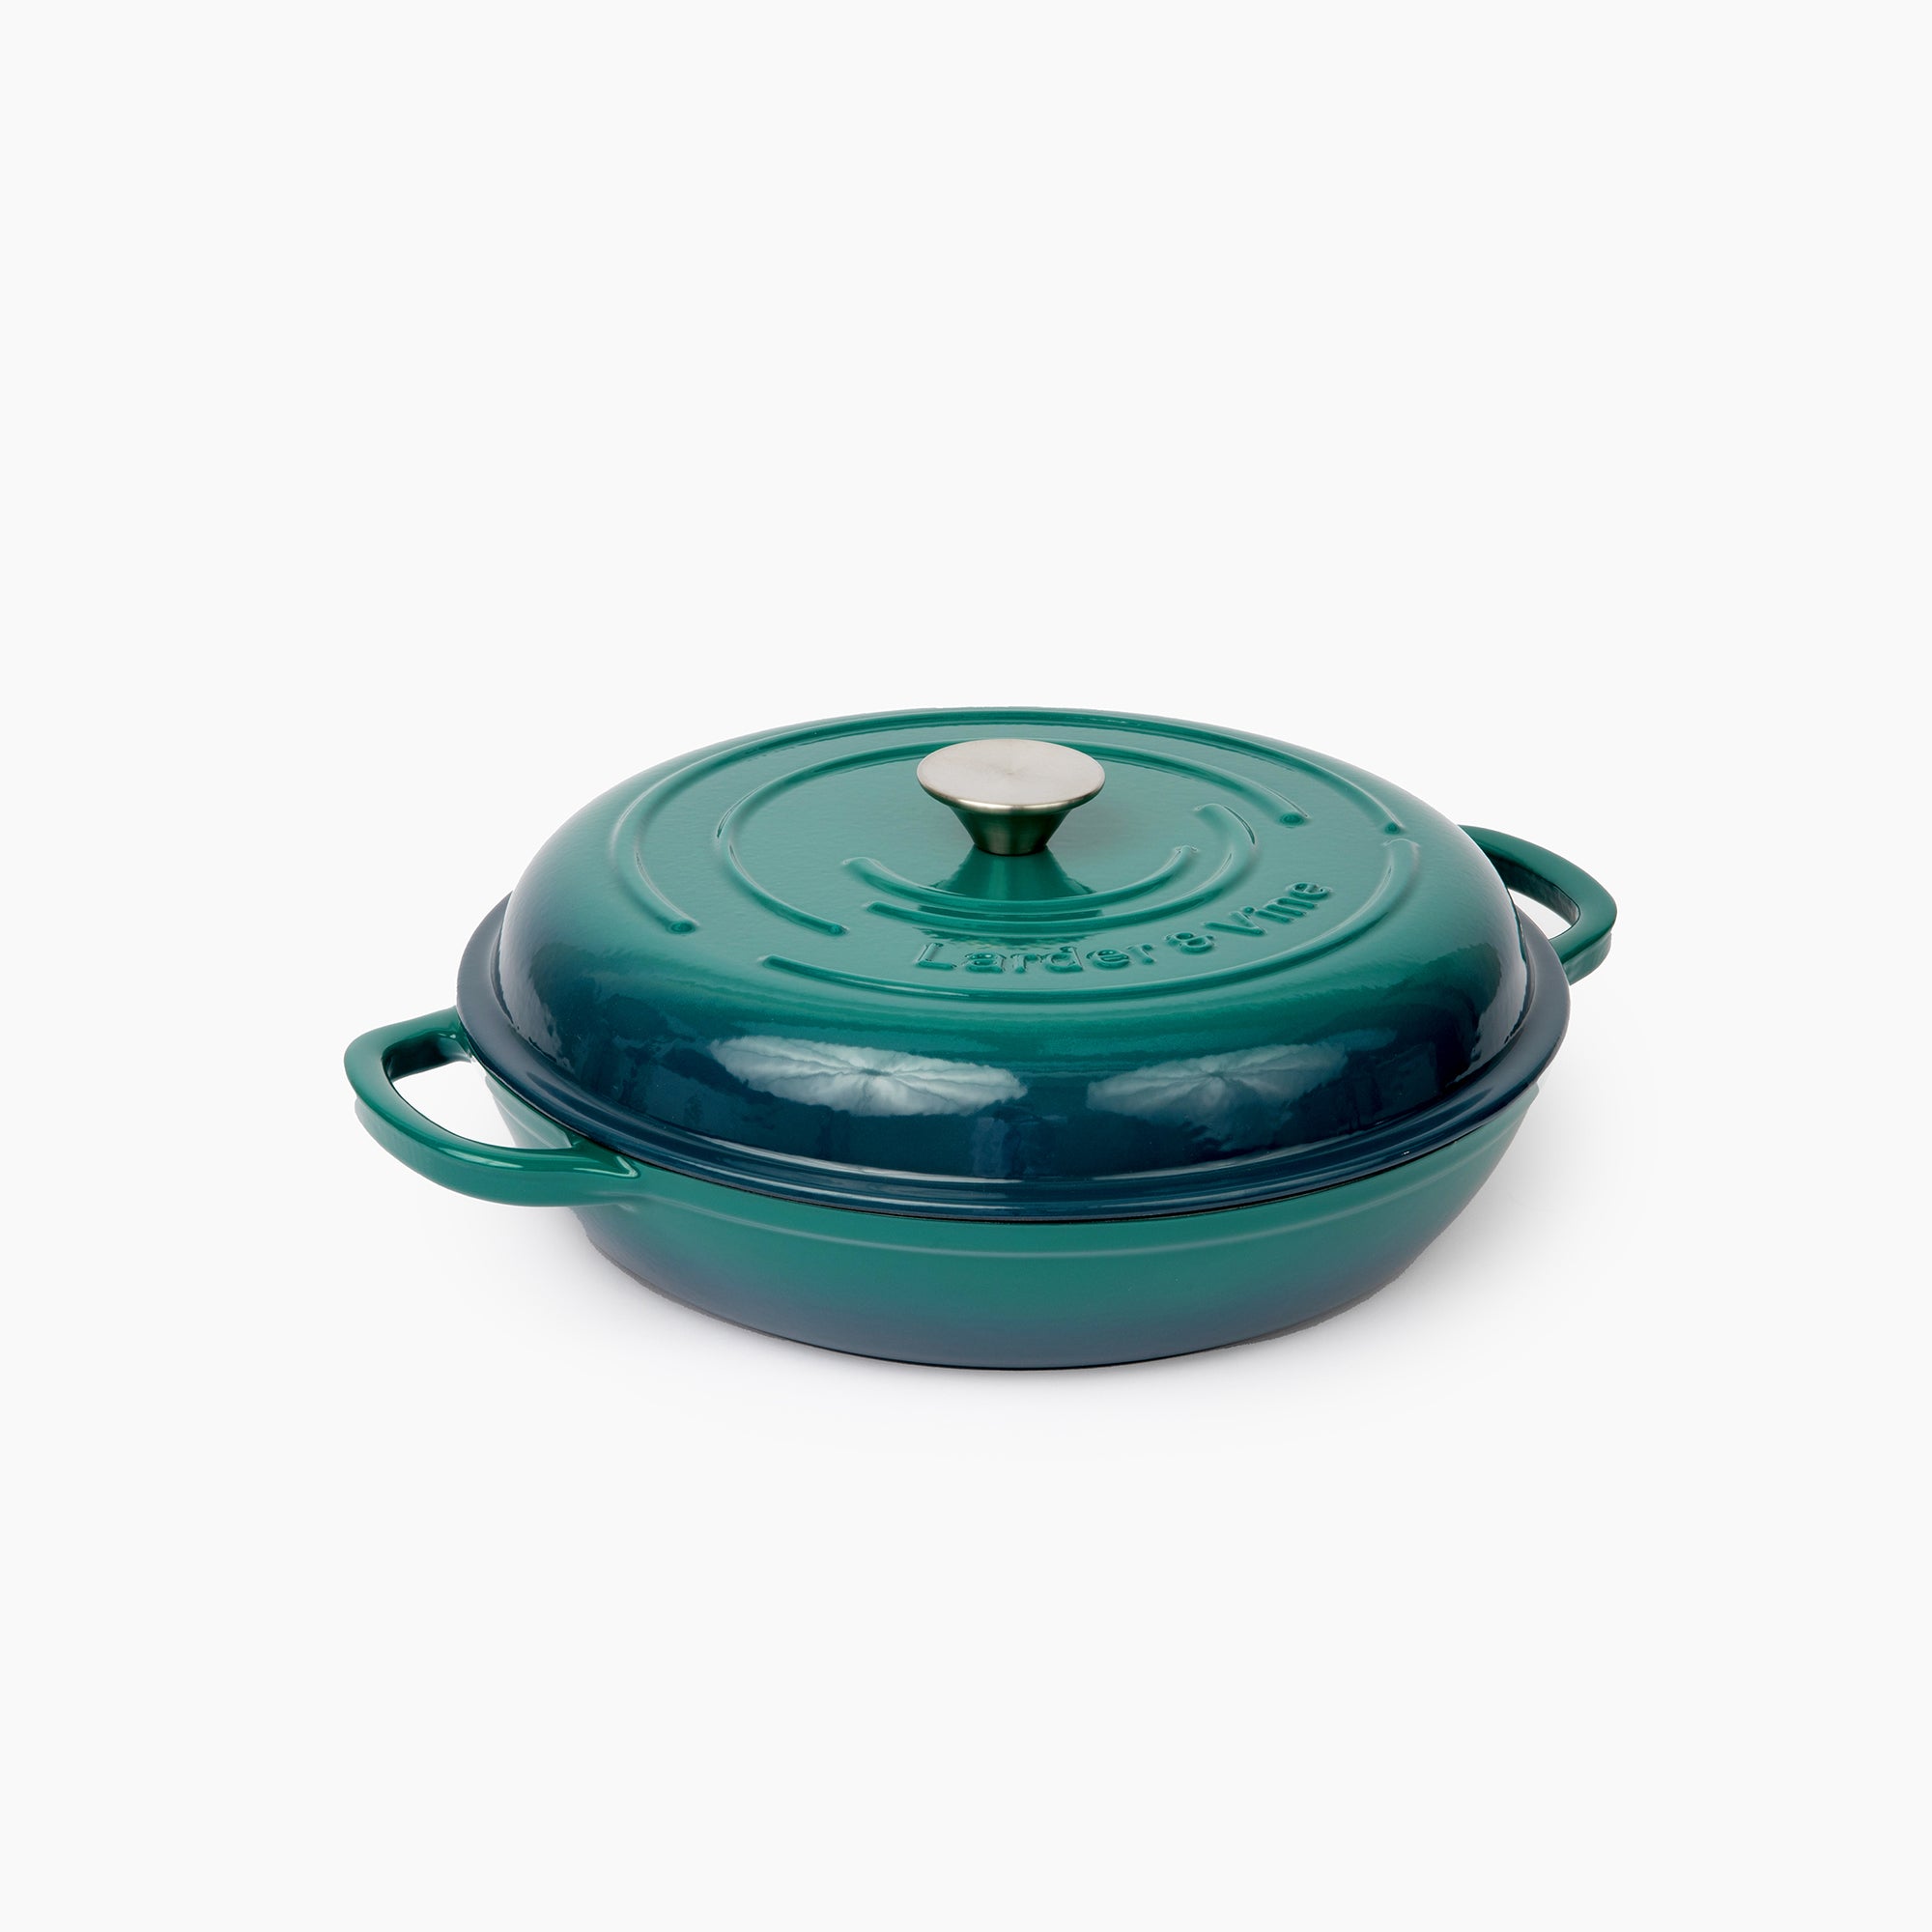 Le Creuset Enameled Cast Iron Traditional Braiser with Glass Lid | Oyster, 2 1/4 qt.